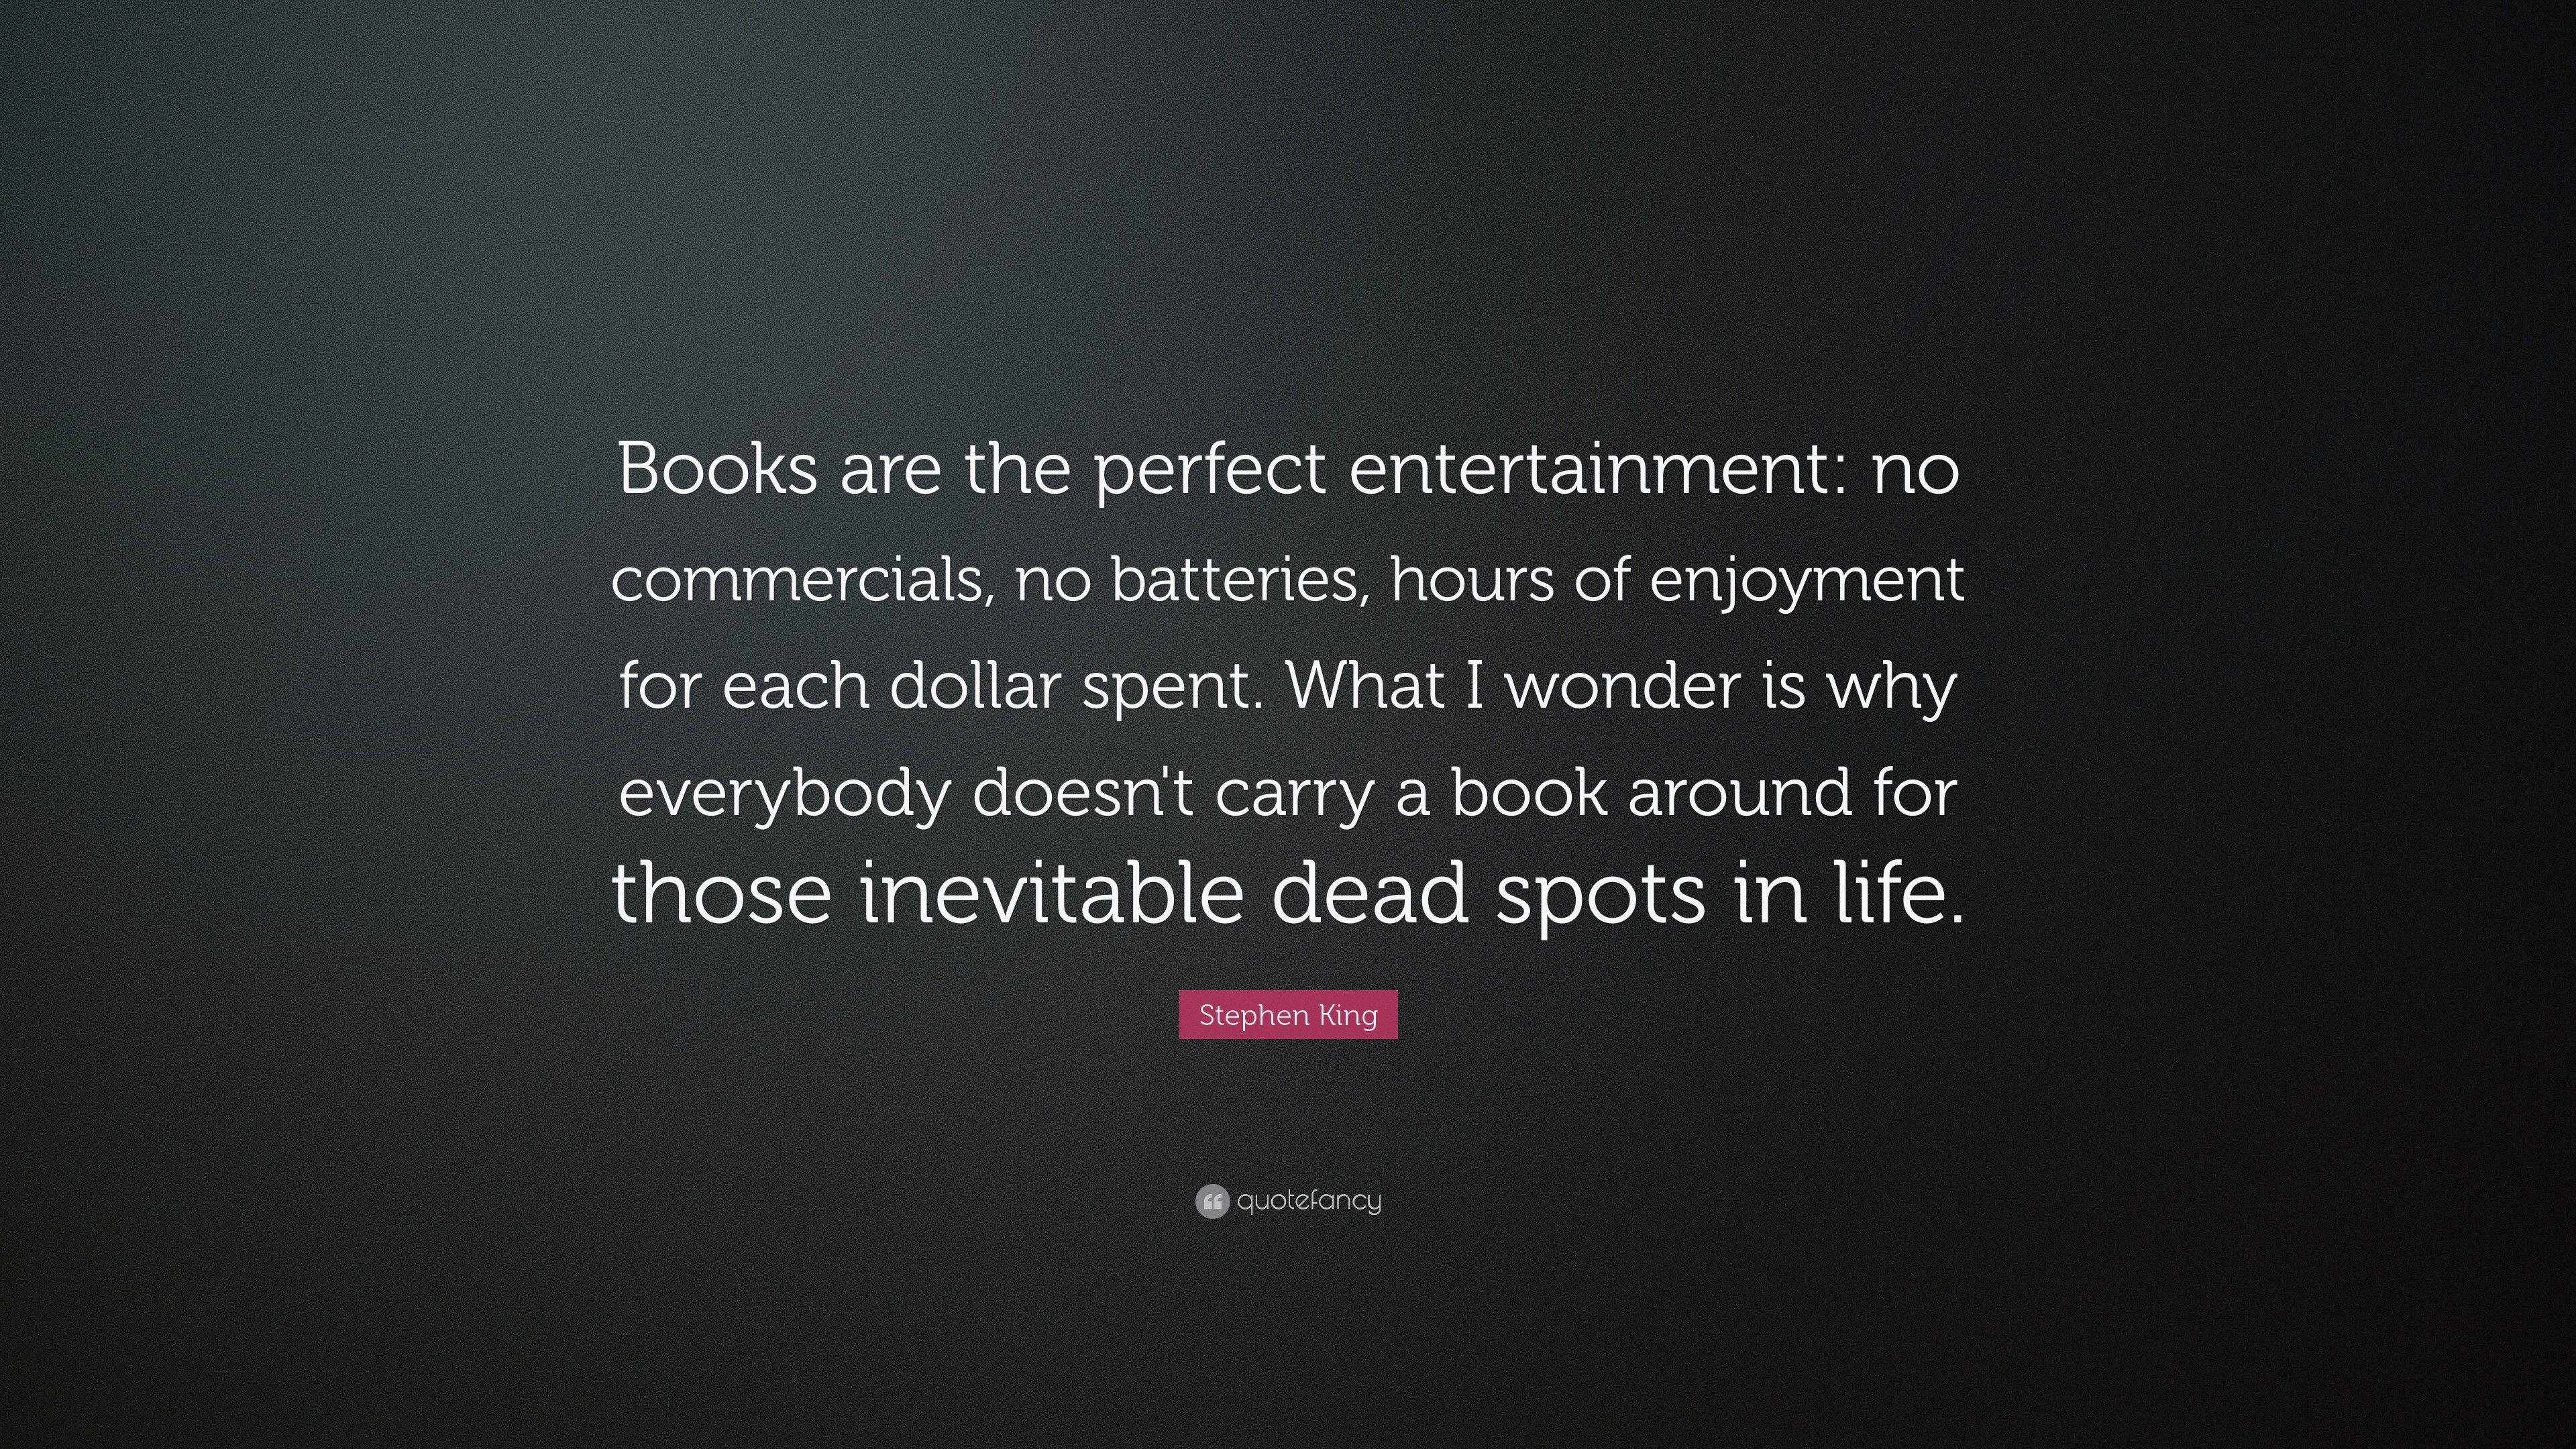 3840x2160 Quotes About Books And Reading: “Books are the perfect entertainment: no  commercials,